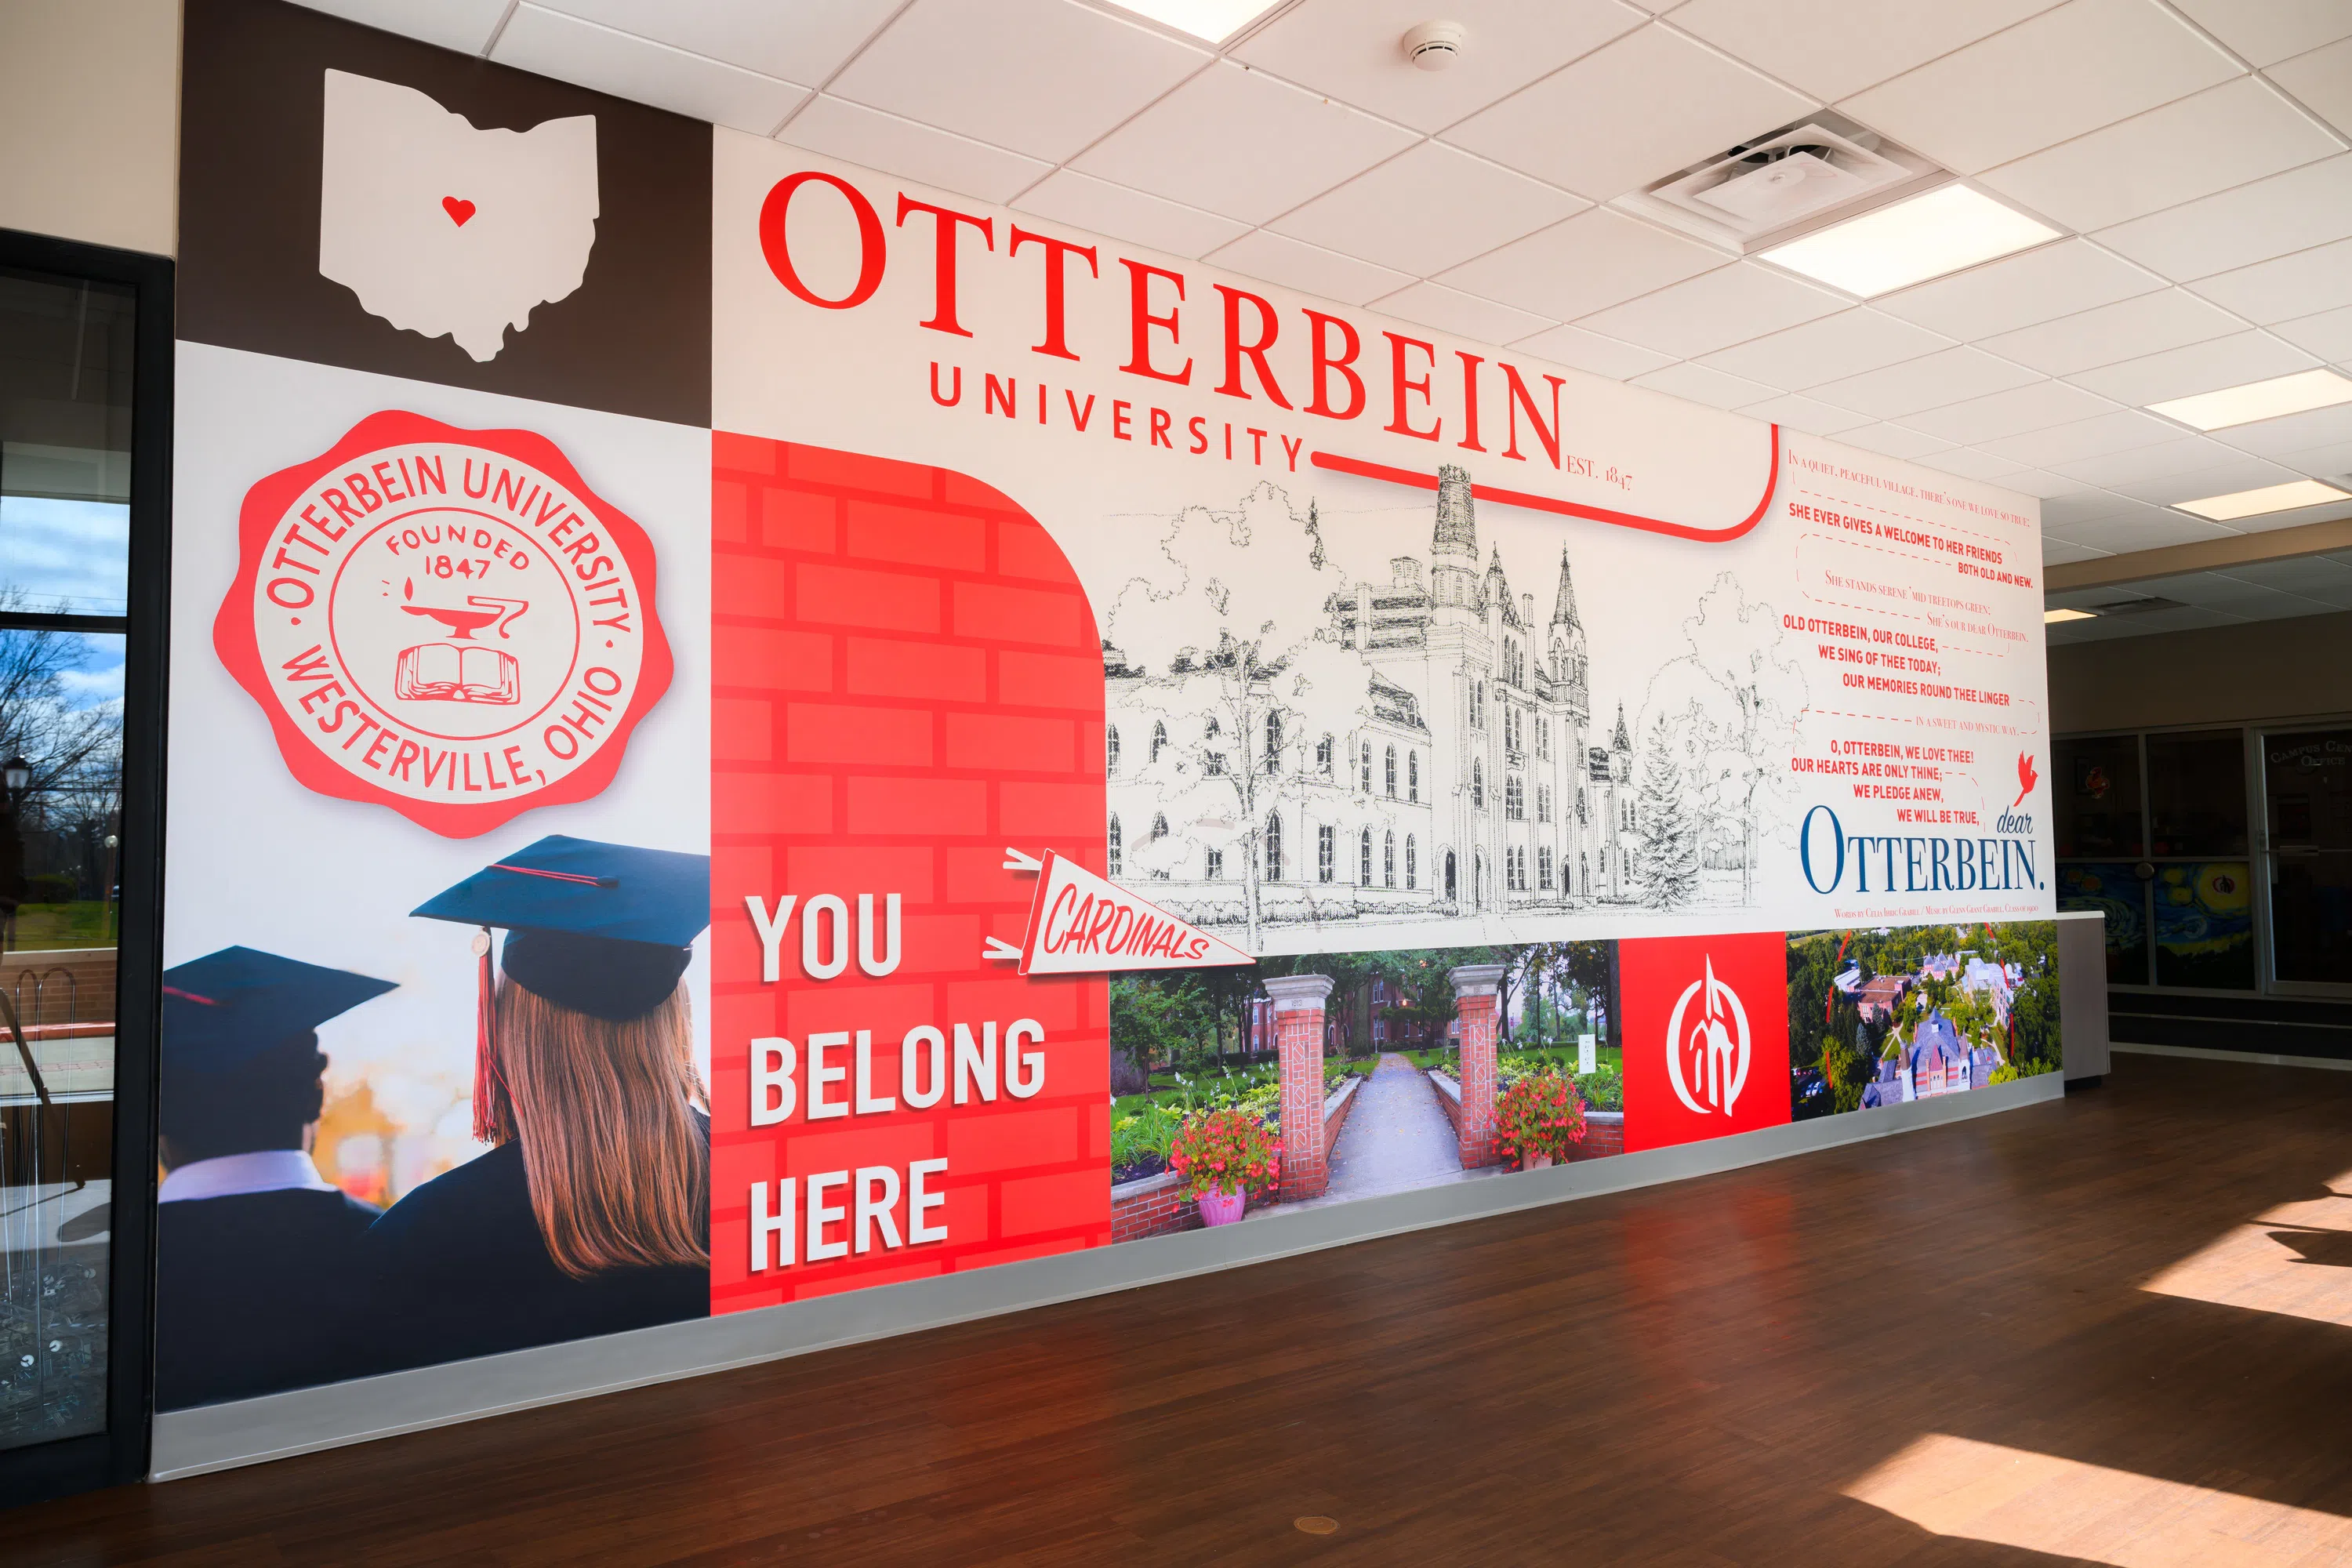 An Otterbein themed wall mural with the Love Song displayed on the right.